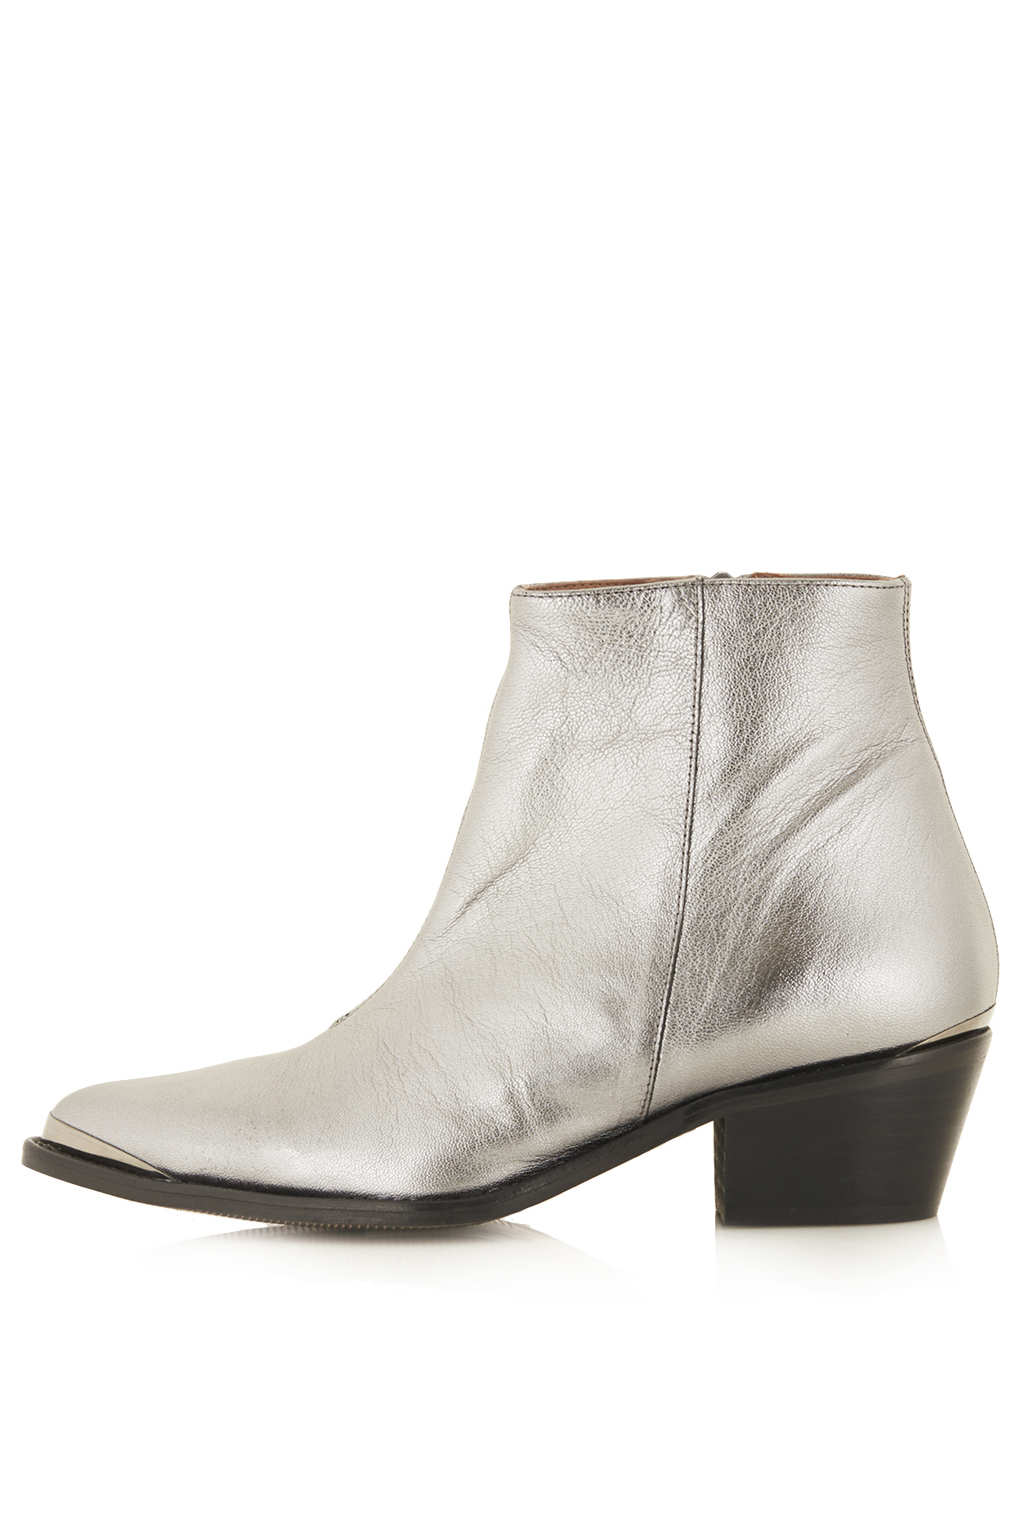 Lyst - Topshop Angle Western Boots in Metallic